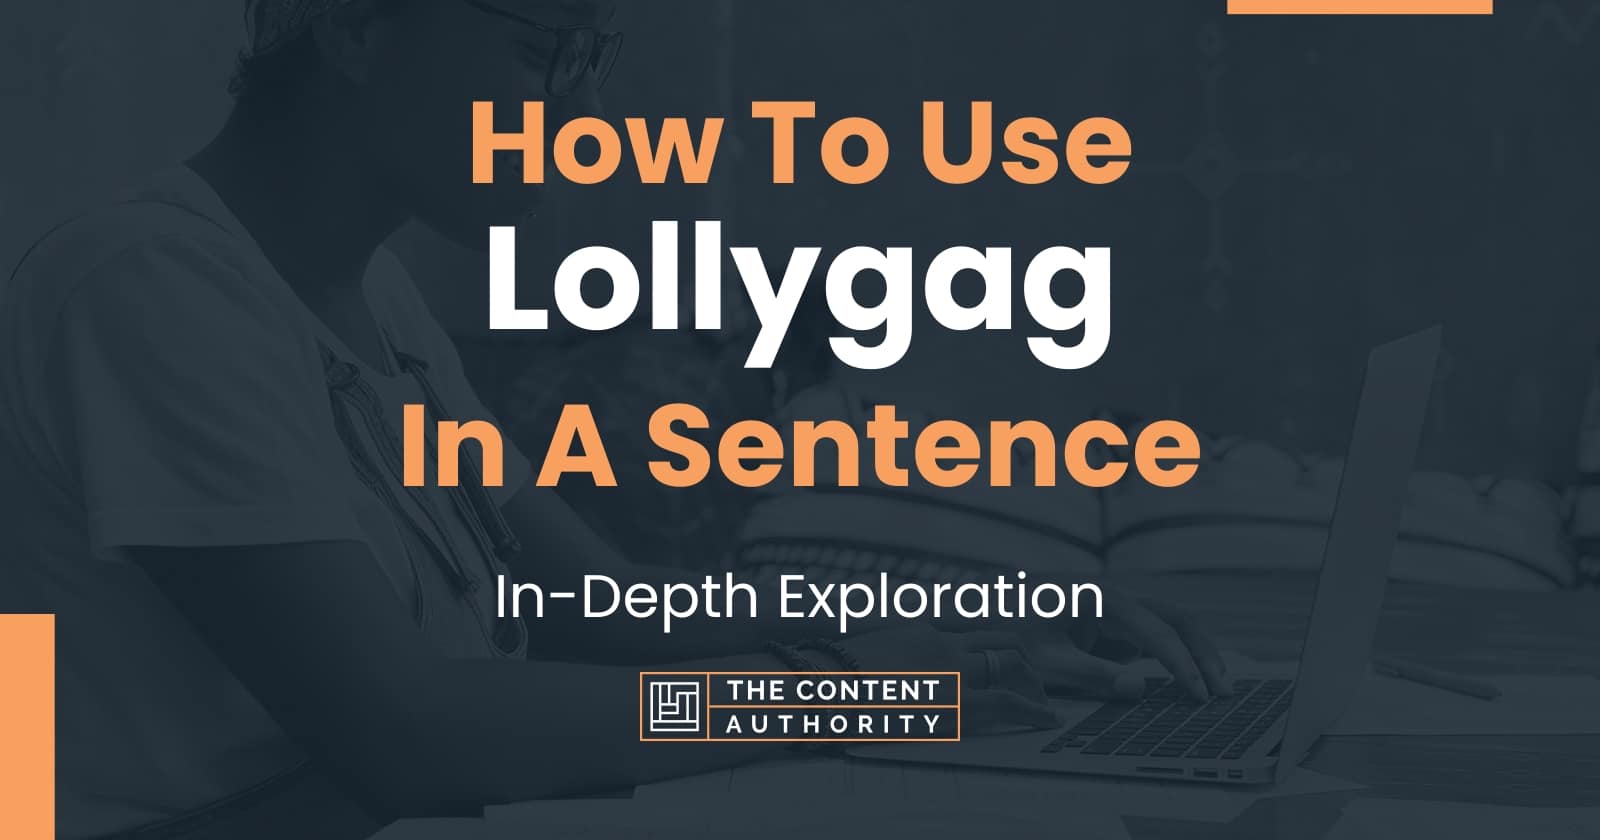 How To Use Lollygag In A Sentence: In-Depth Exploration